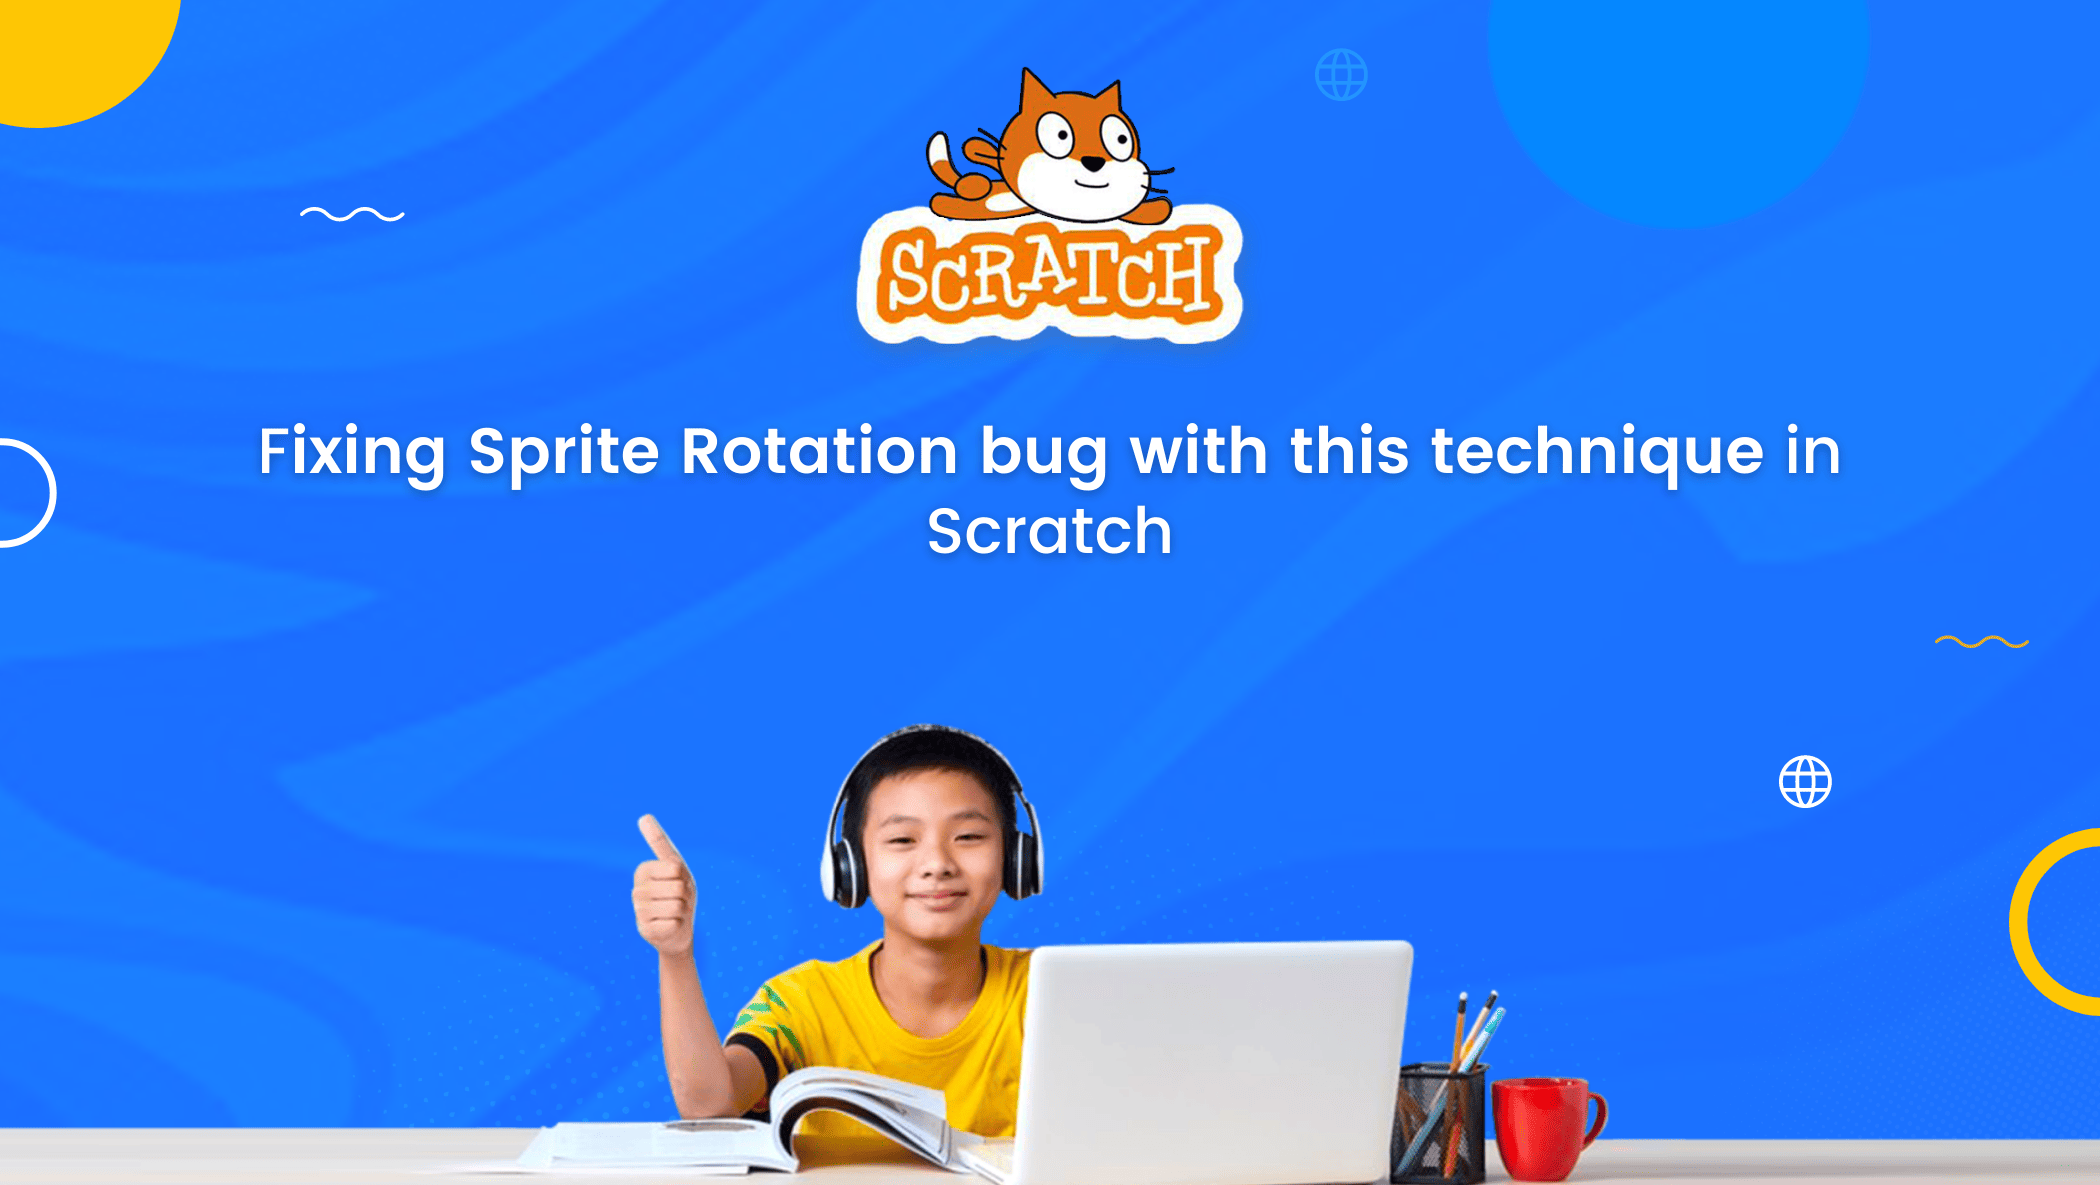 Upside-down Sprite in Scratch; fix Sprite Rotation bug with this technique